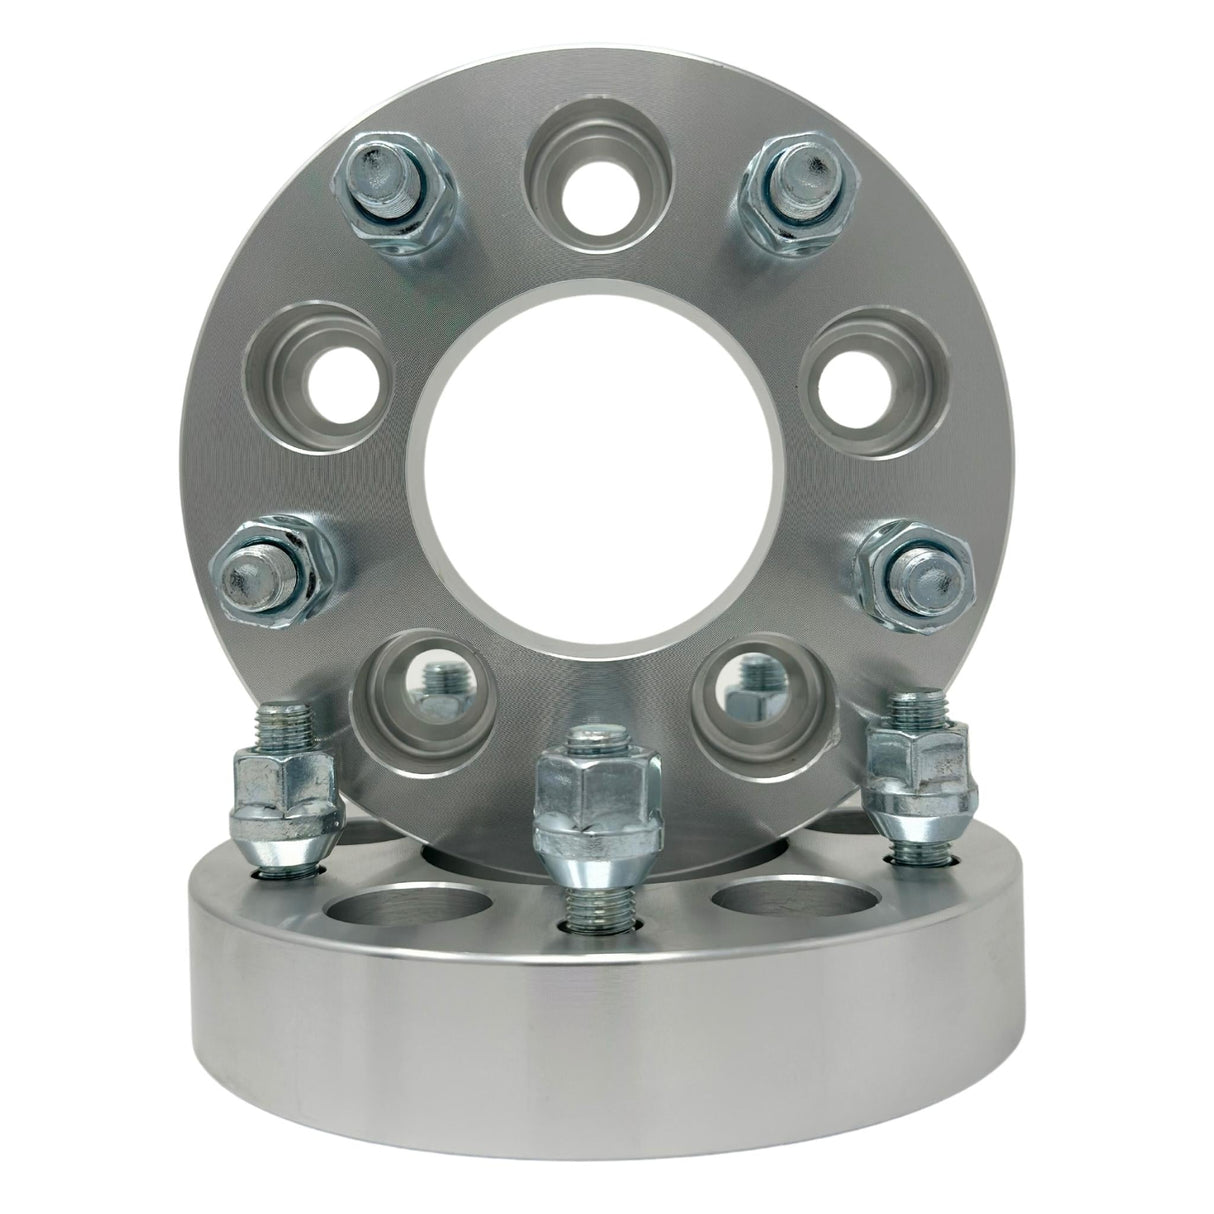 5x5 to 5x4.75 Wheel Adapters 2" Inch (50mm) 1/2”-20 Studs & Lug Nuts 74mm Center Bore | 5x127 to 5x120.7